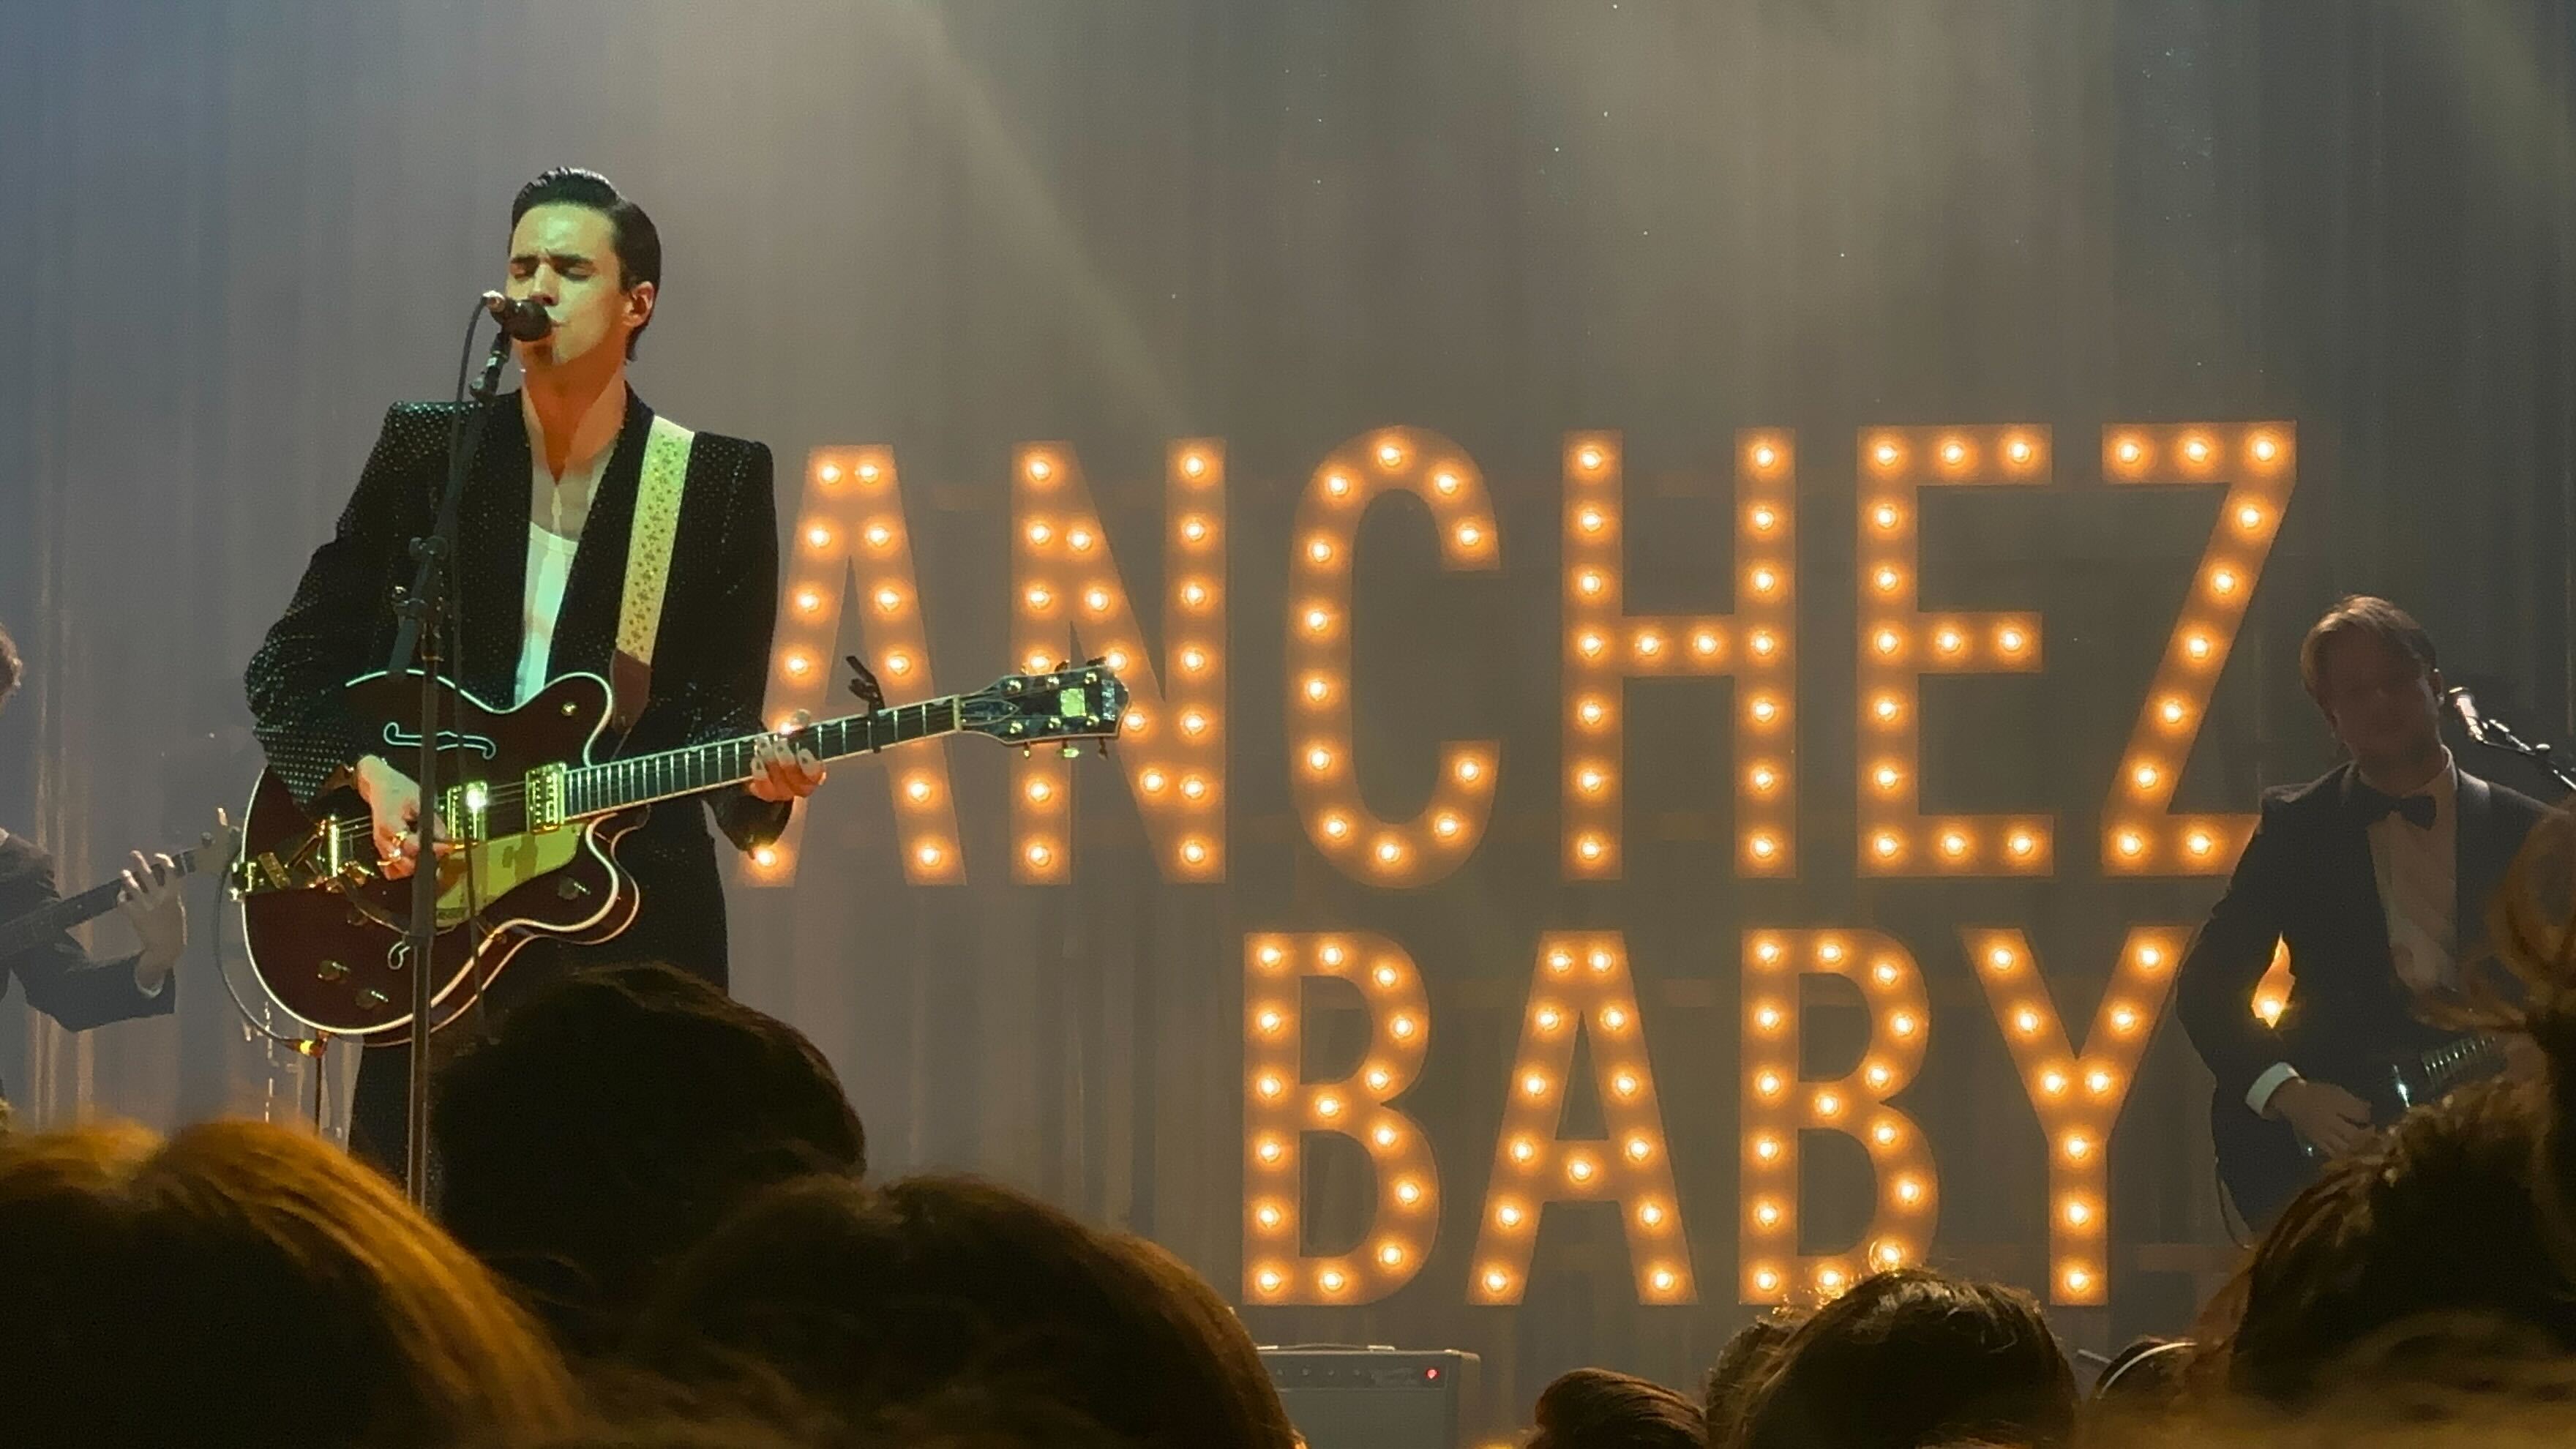 Watch the 1950s-esque Video for Stephen Sanchez's 'Until I Found You